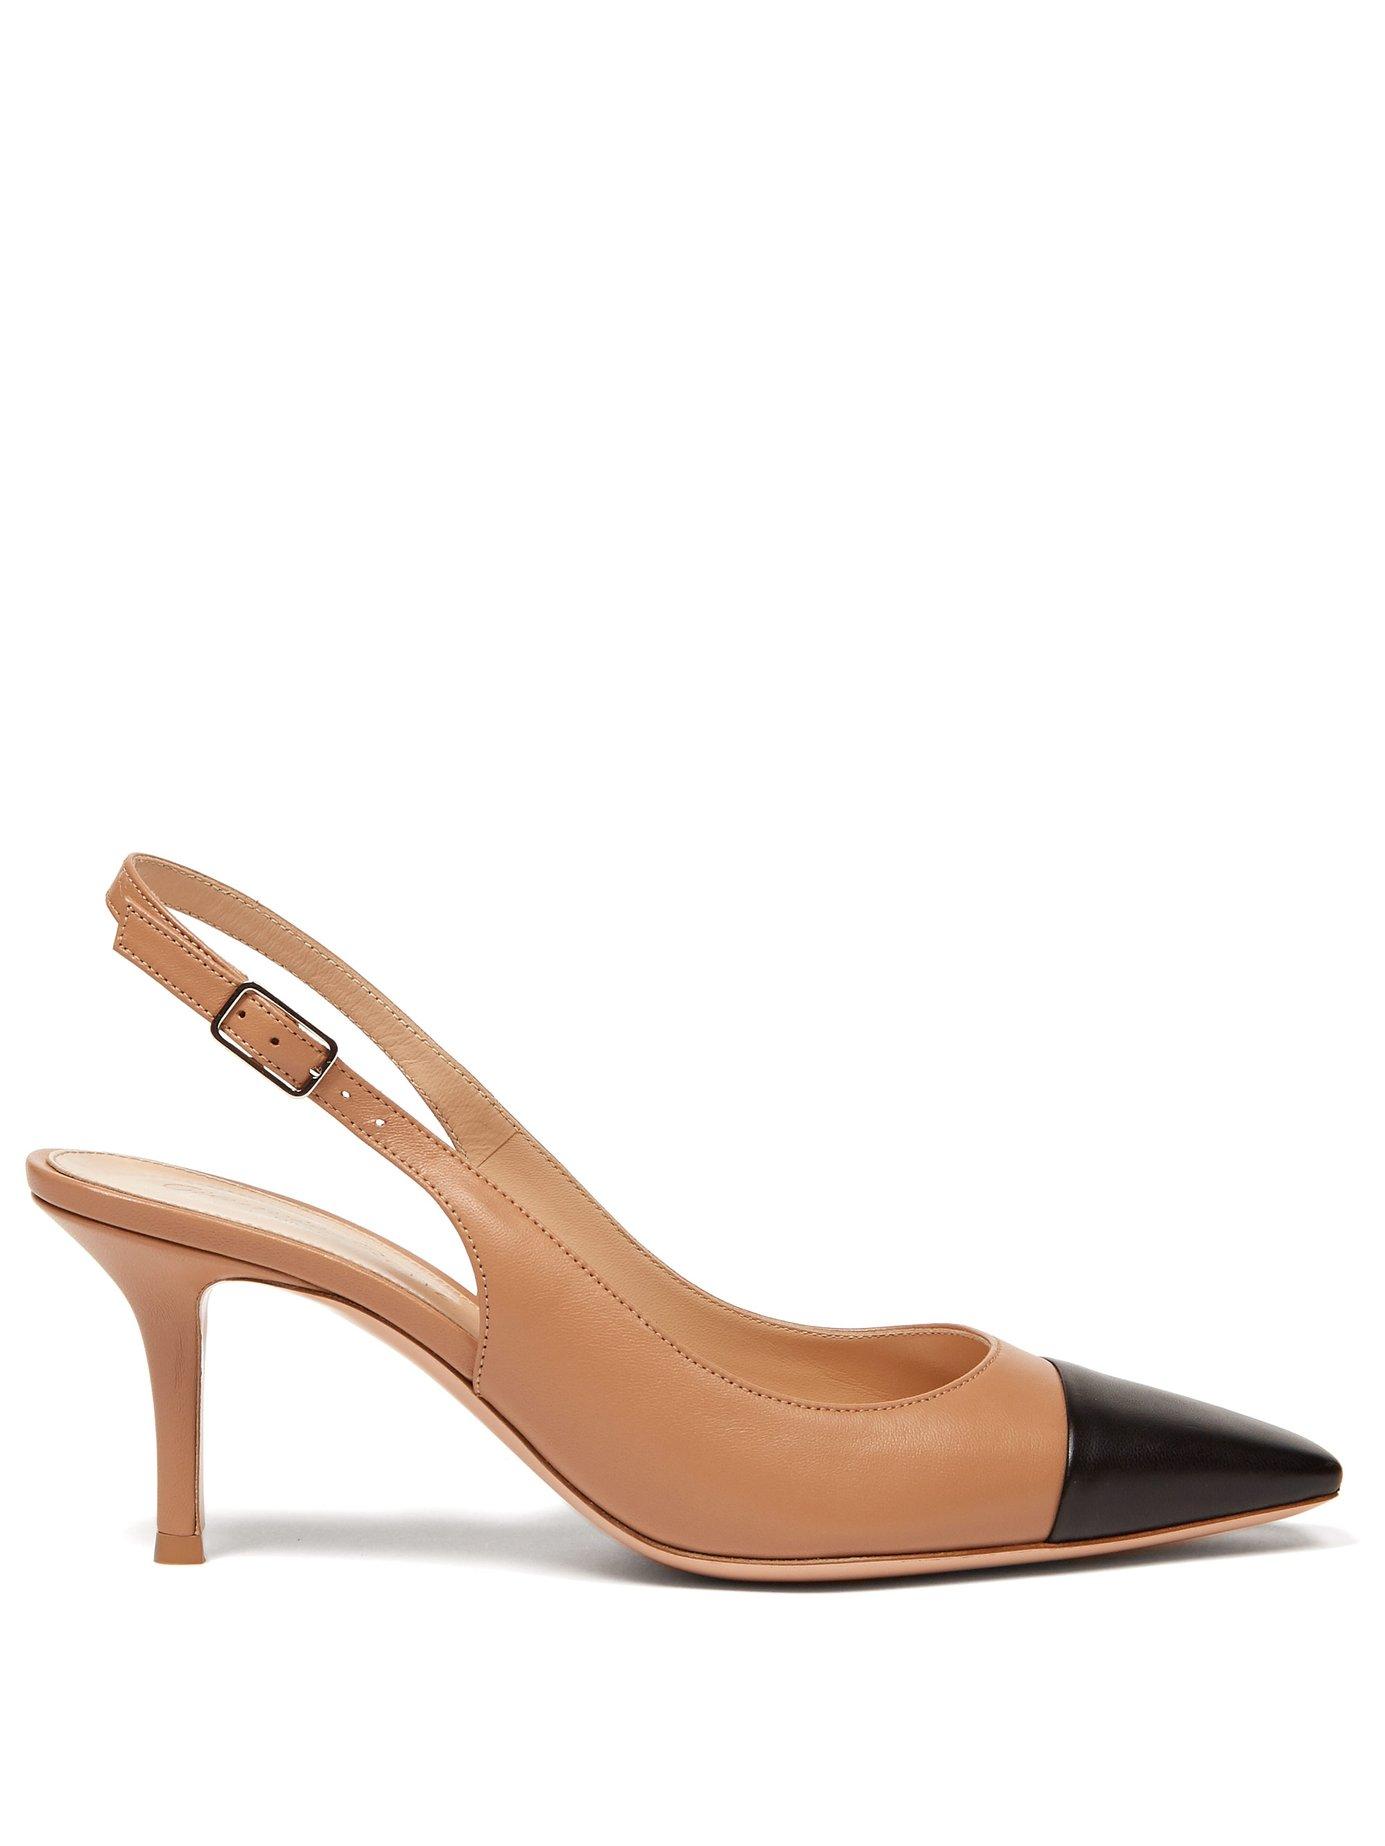 Gianvito Rossi Lucy 70 Leather Slingback Pumps - Lyst